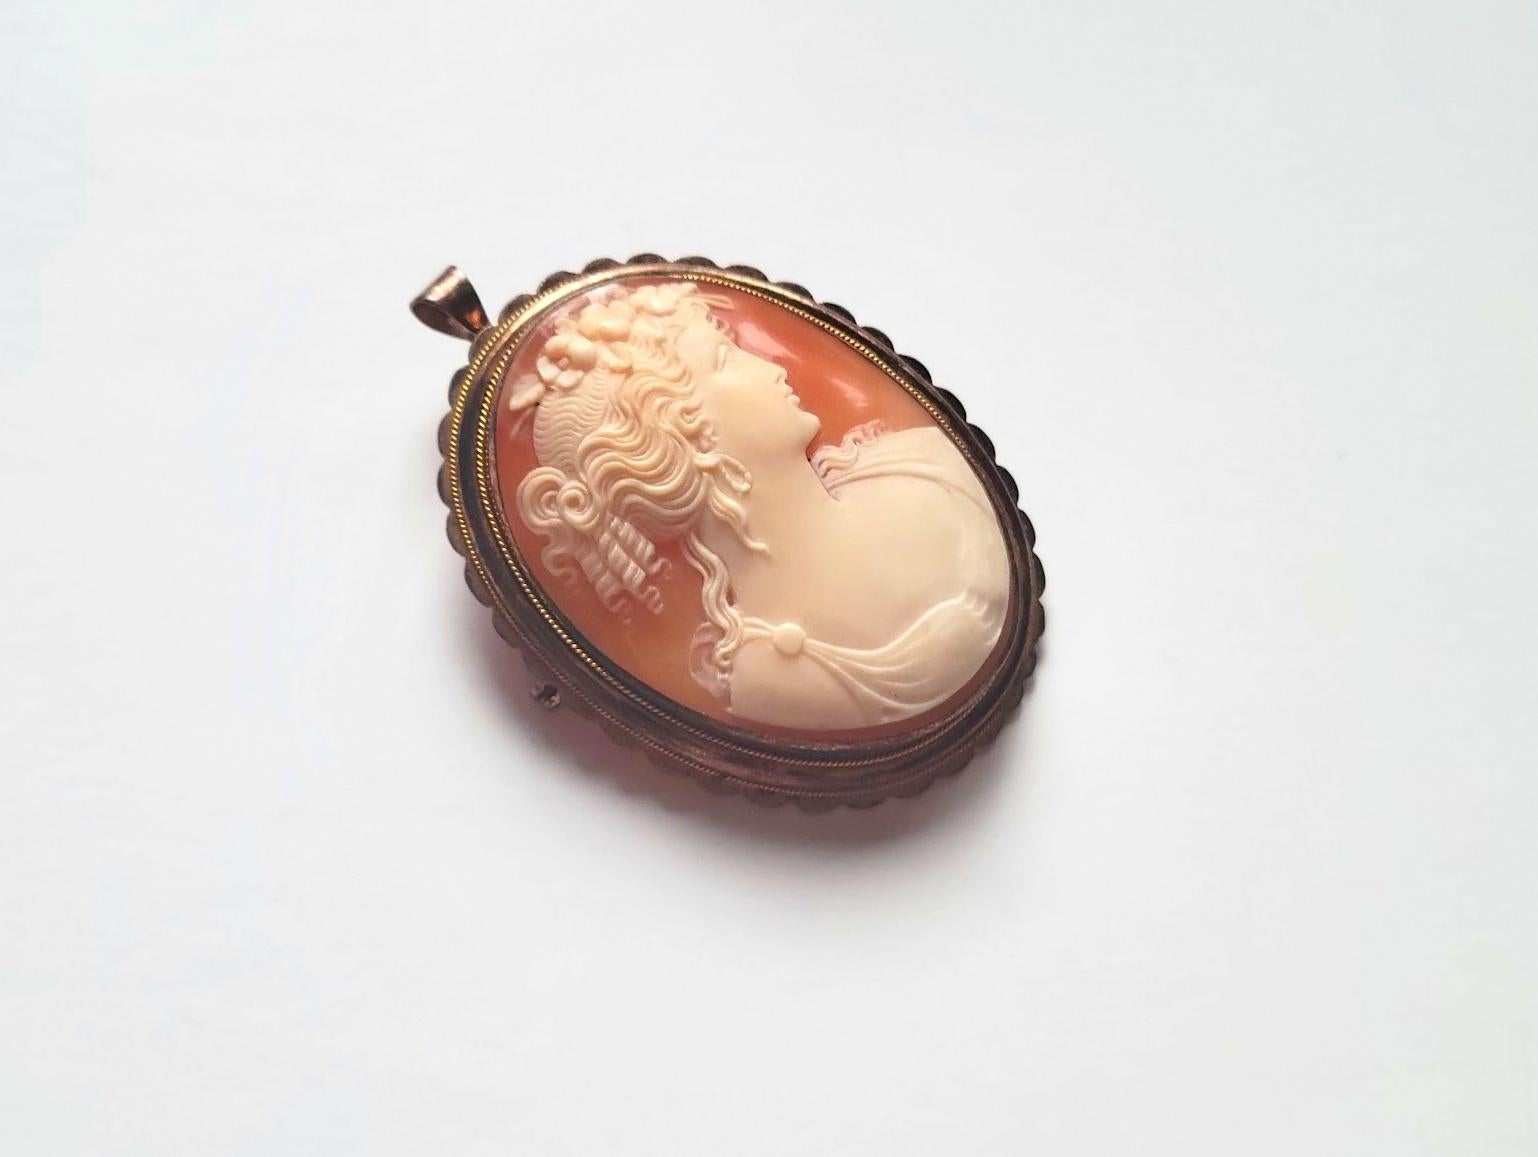 Lovely carved cameo brooch made in the late 19th - early 20th century. It depicts a beautiful portrait of a Flora (a Roman goddess of flowers and spring – a symbol for nature and flowers). The execution of the shell is amazing, and the relief helps